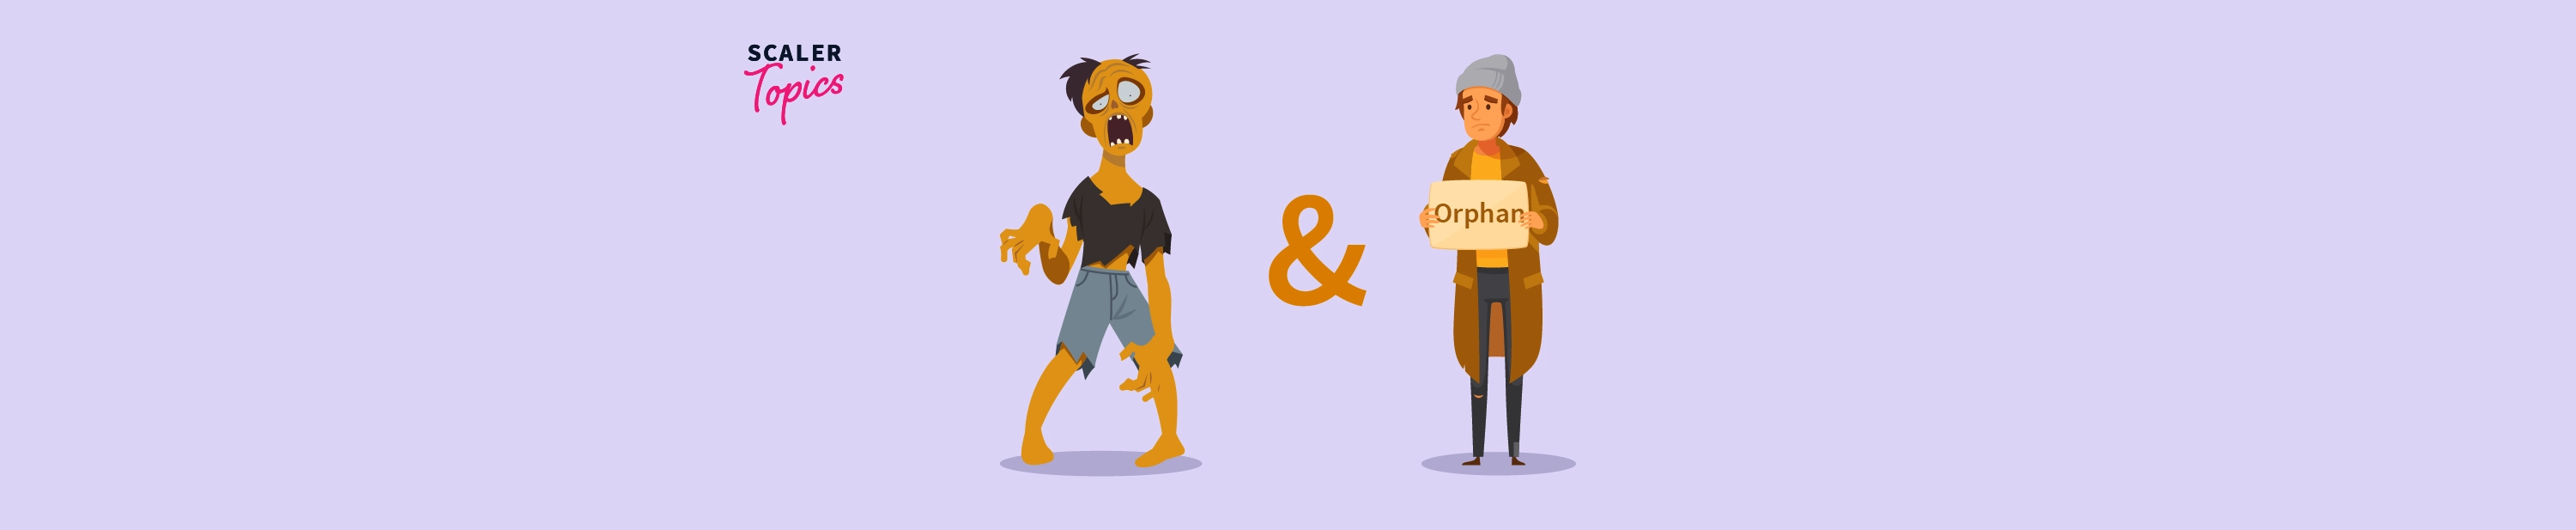 Zombie And Orphan Process In Os.webp